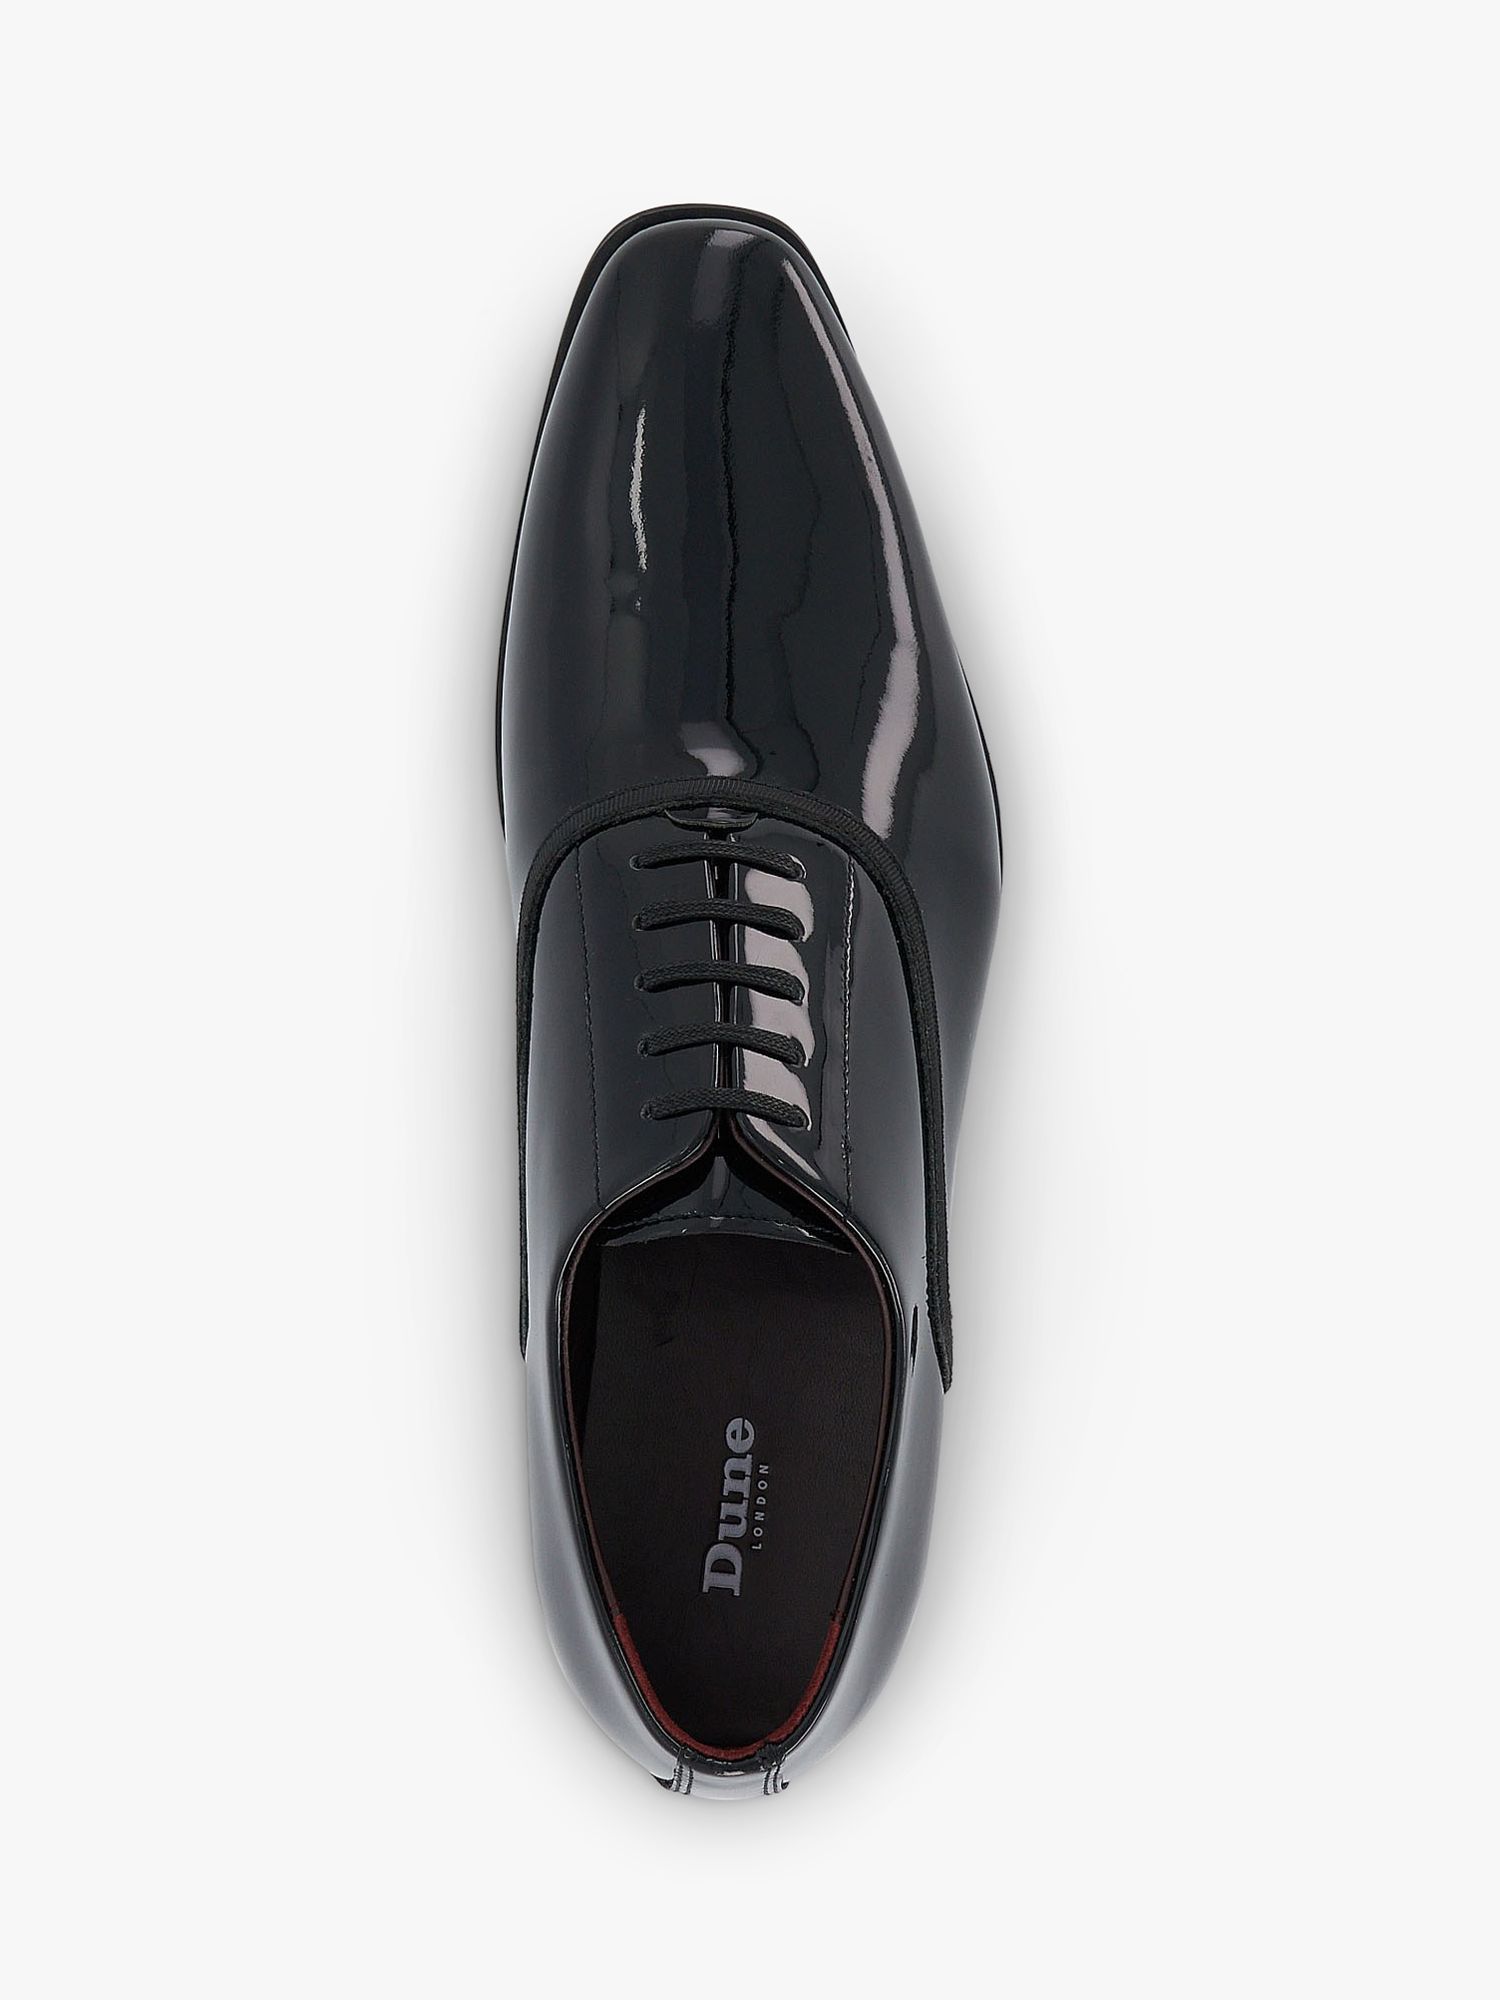 Buy Dune Swallow Wide Fit Patent Leather Oxford Shoes, Black Online at johnlewis.com